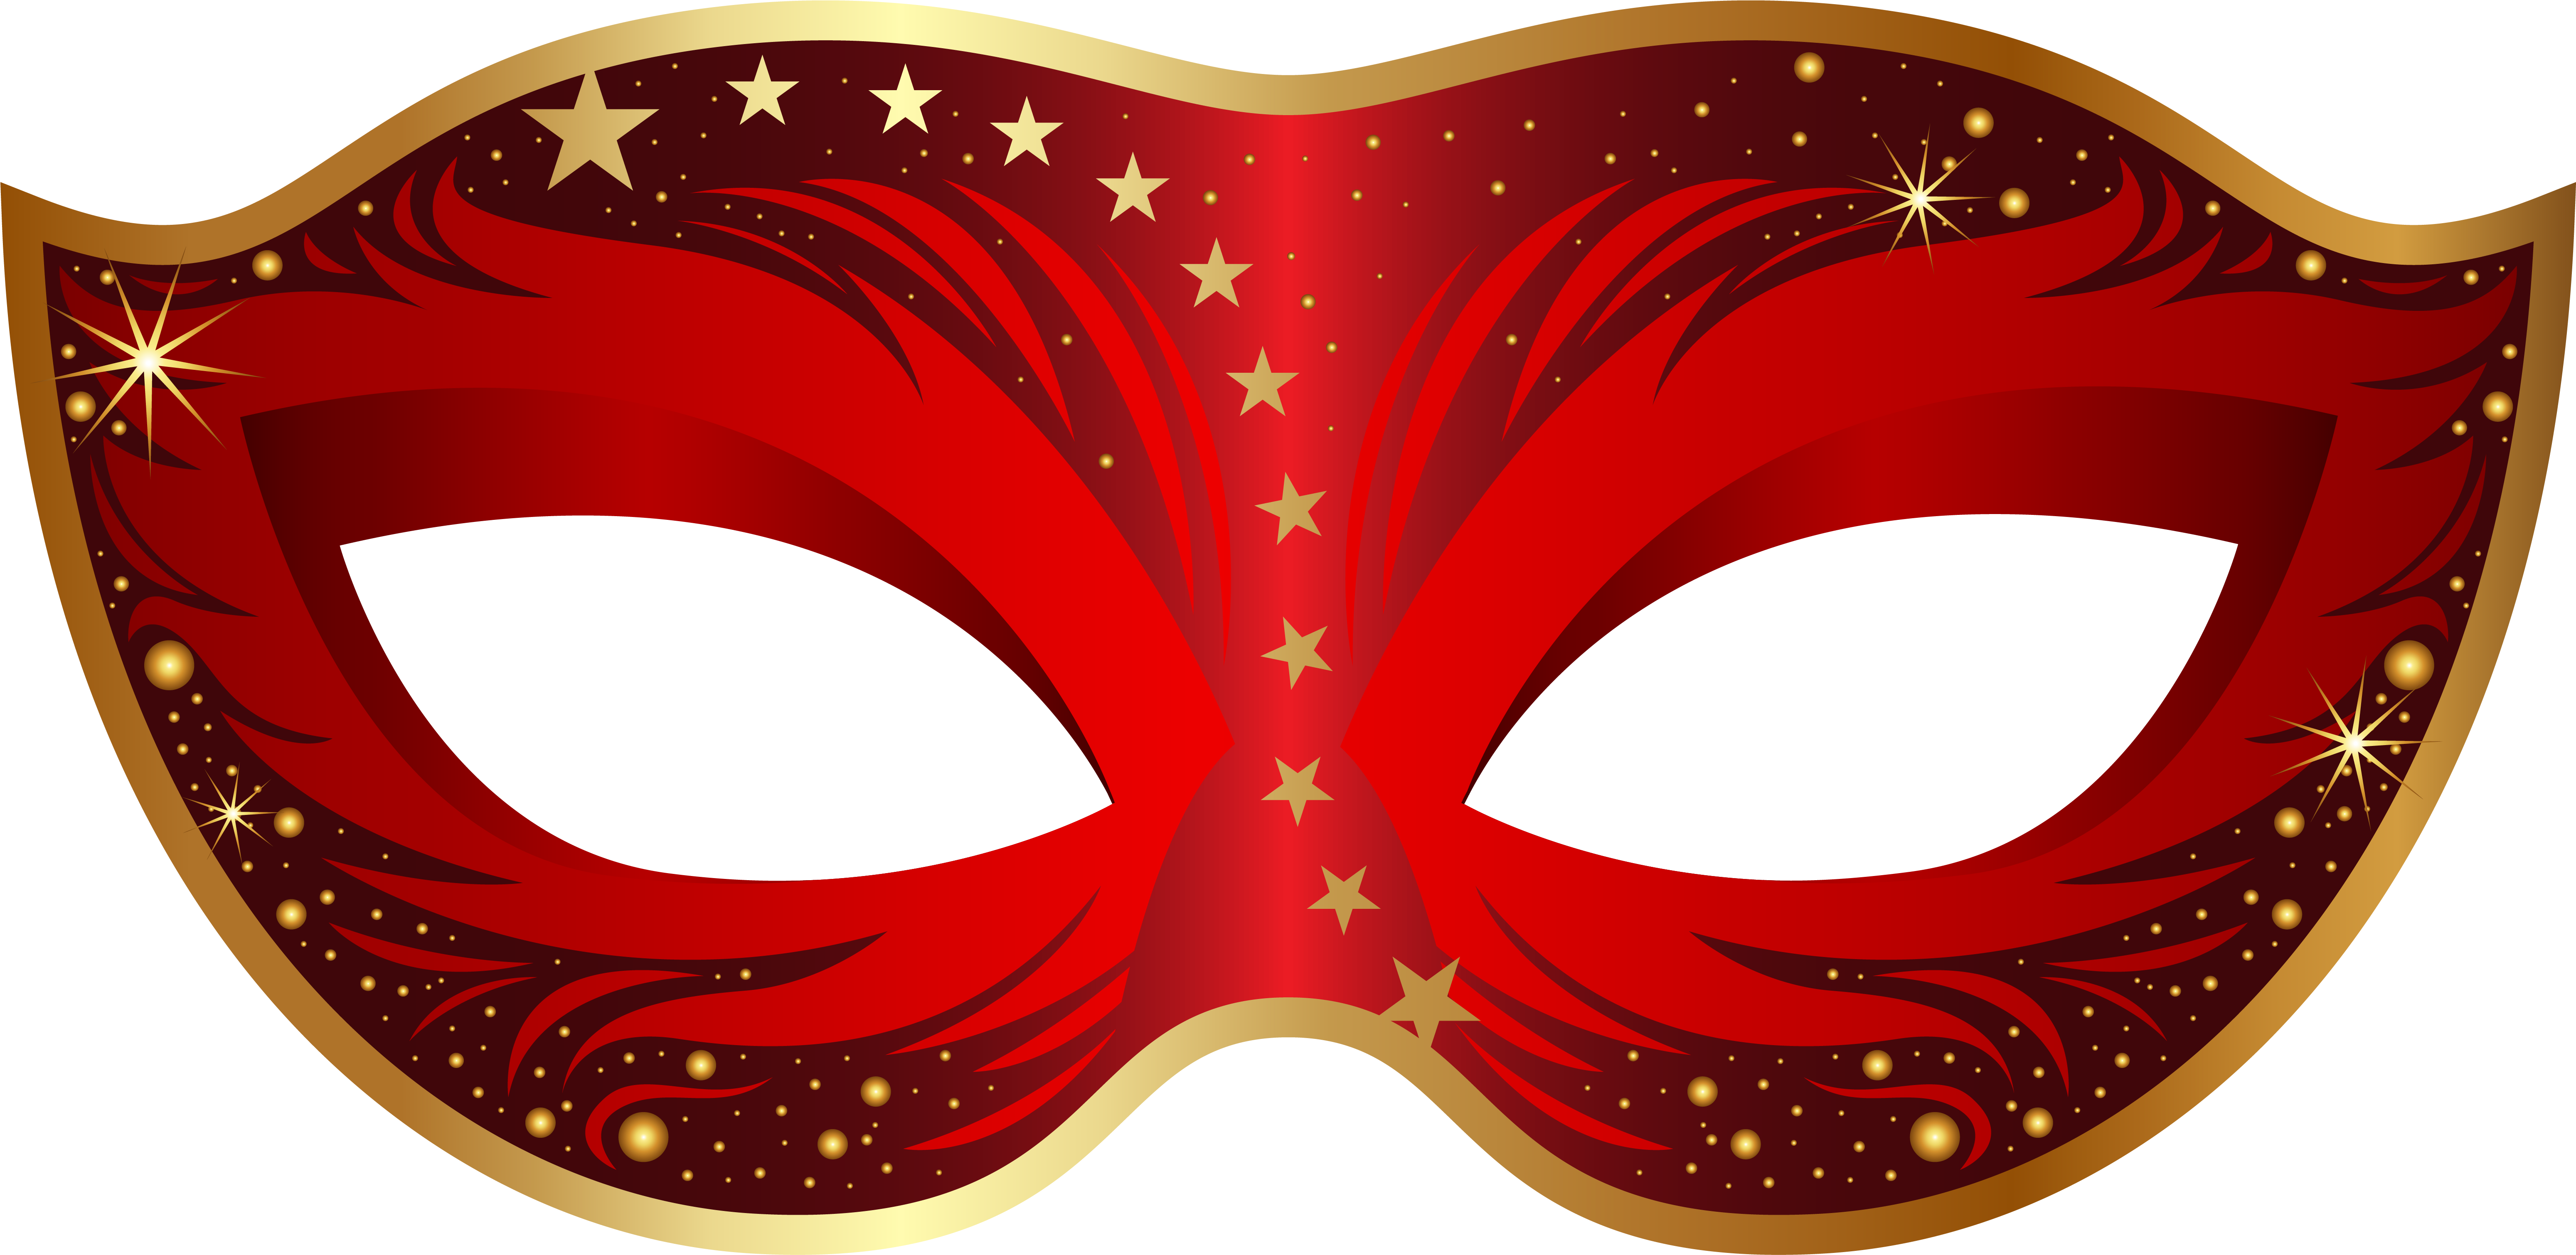 Download - Red Masquerade Mask Png (6385x3111)